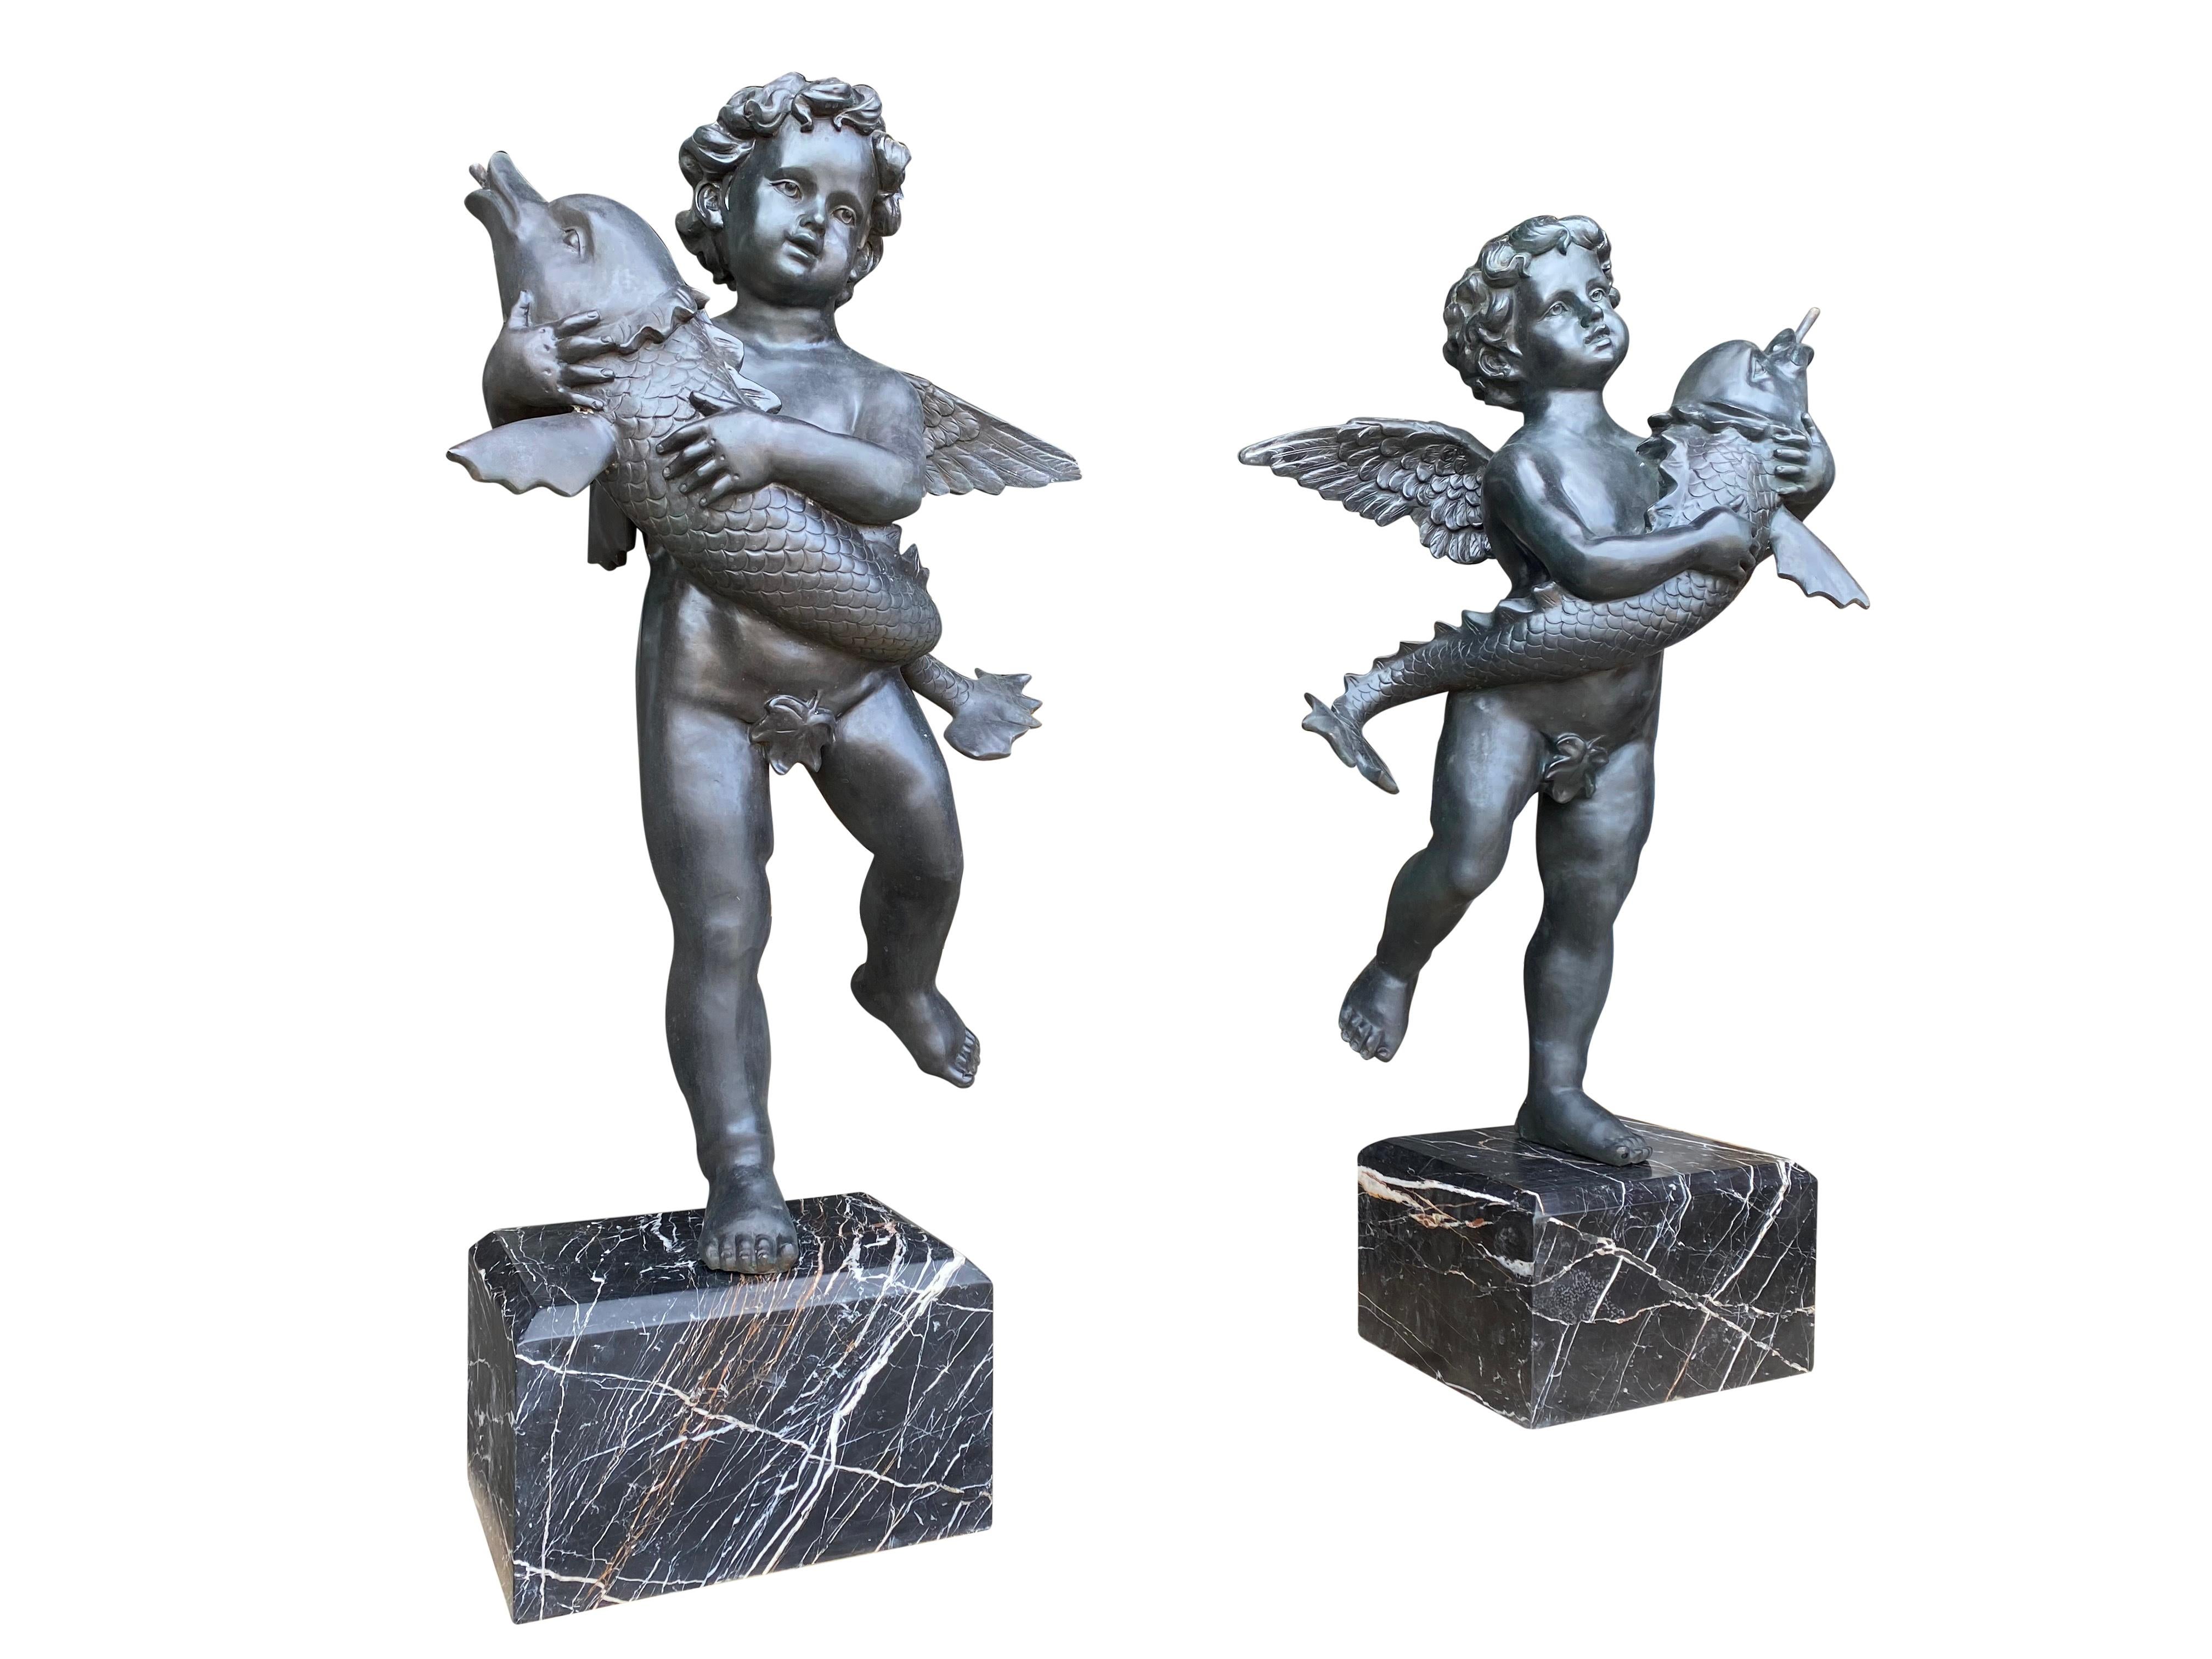 A large impressive pair of 20th century bronze Cherub fountains with fish. Situated on Verdi Antico marble bases. This pair are fully functional working fountains, perfect for garden use and ponds.